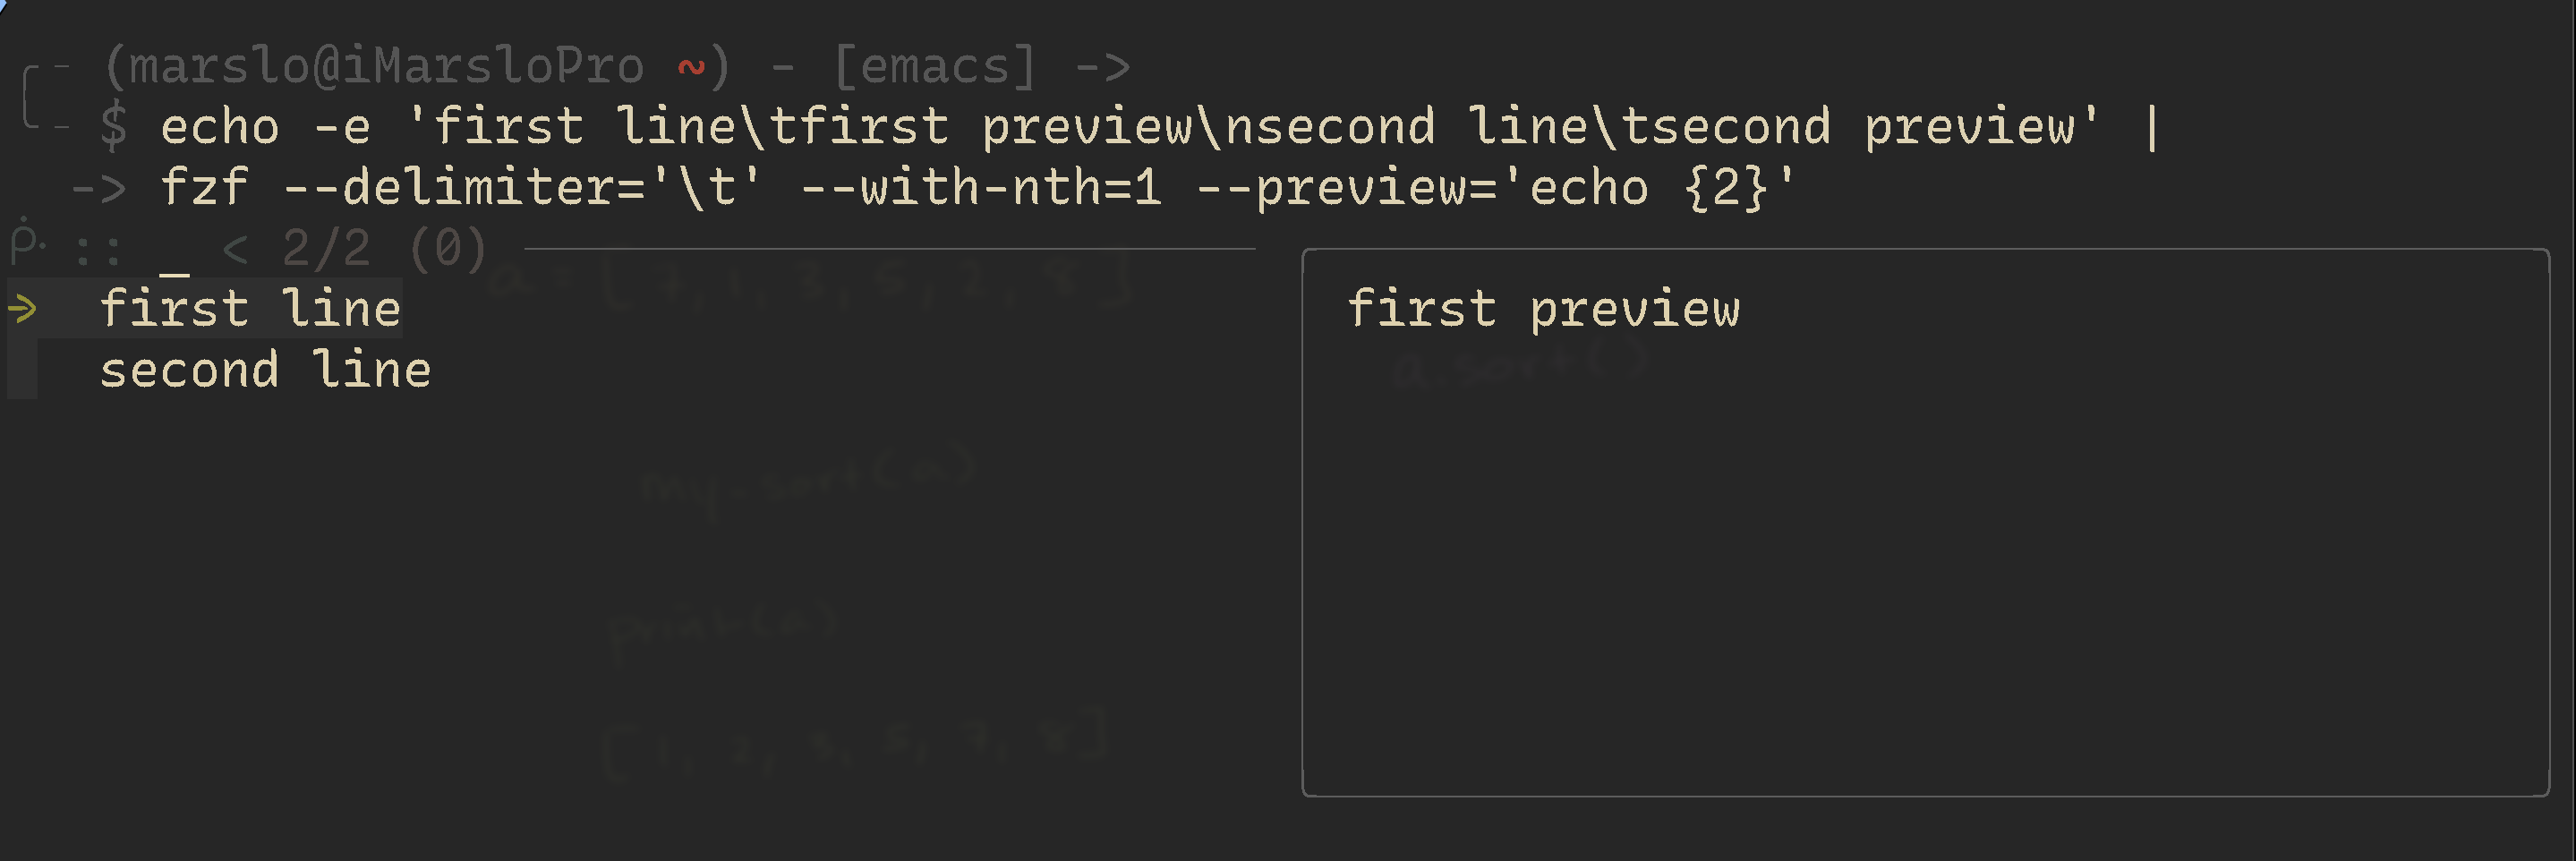 fzf --with-nth for preview